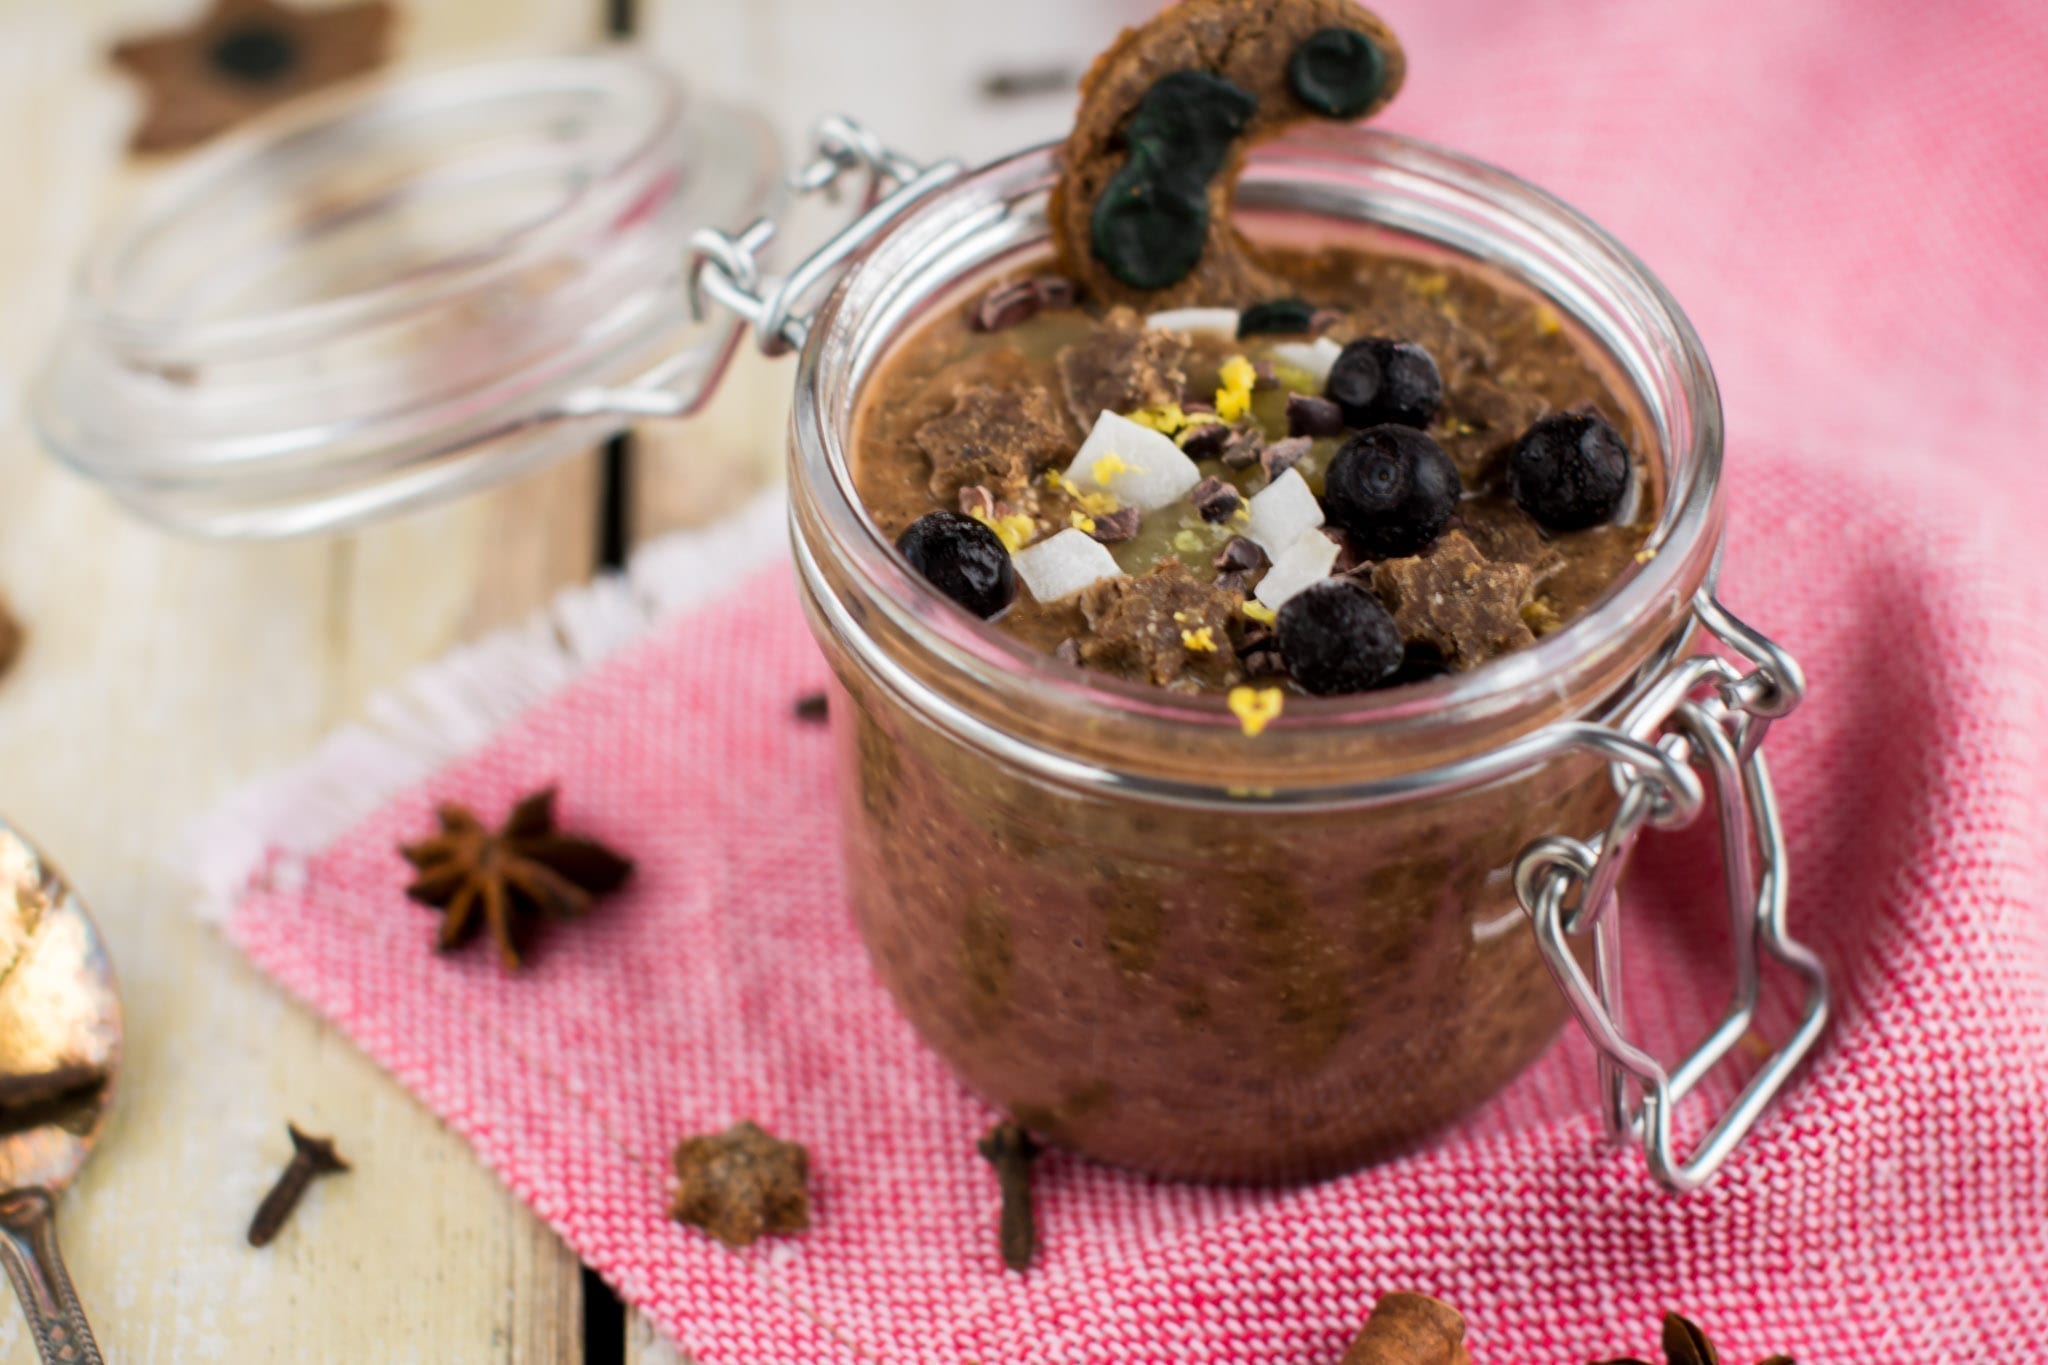 vegan candida cleanse meal plan chia pudding with carob